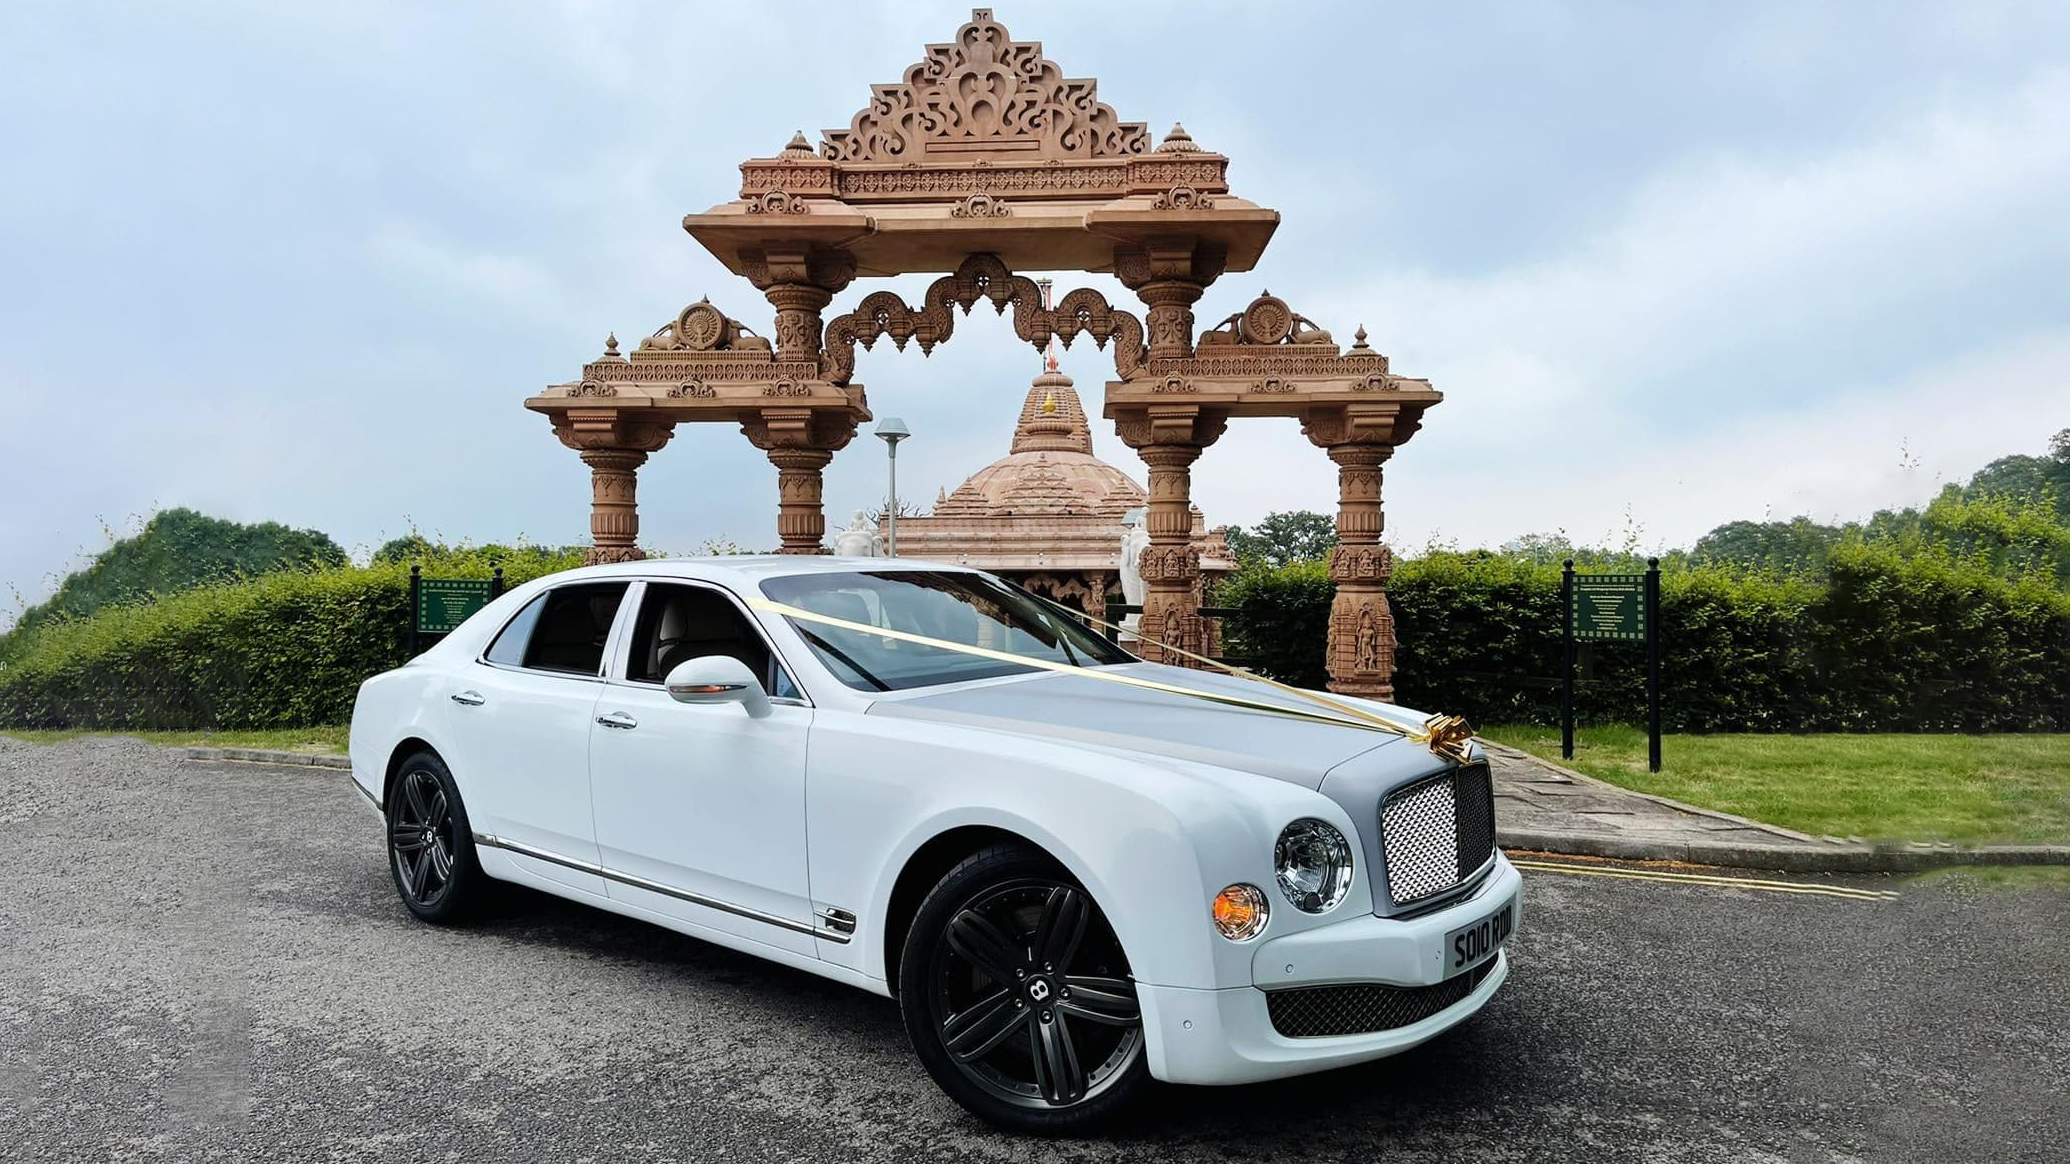 Modern Bentley Mulsanne with Black alloy wheels and Gold ribbons park in front of an Asian Temple in Barton-le-Clay.